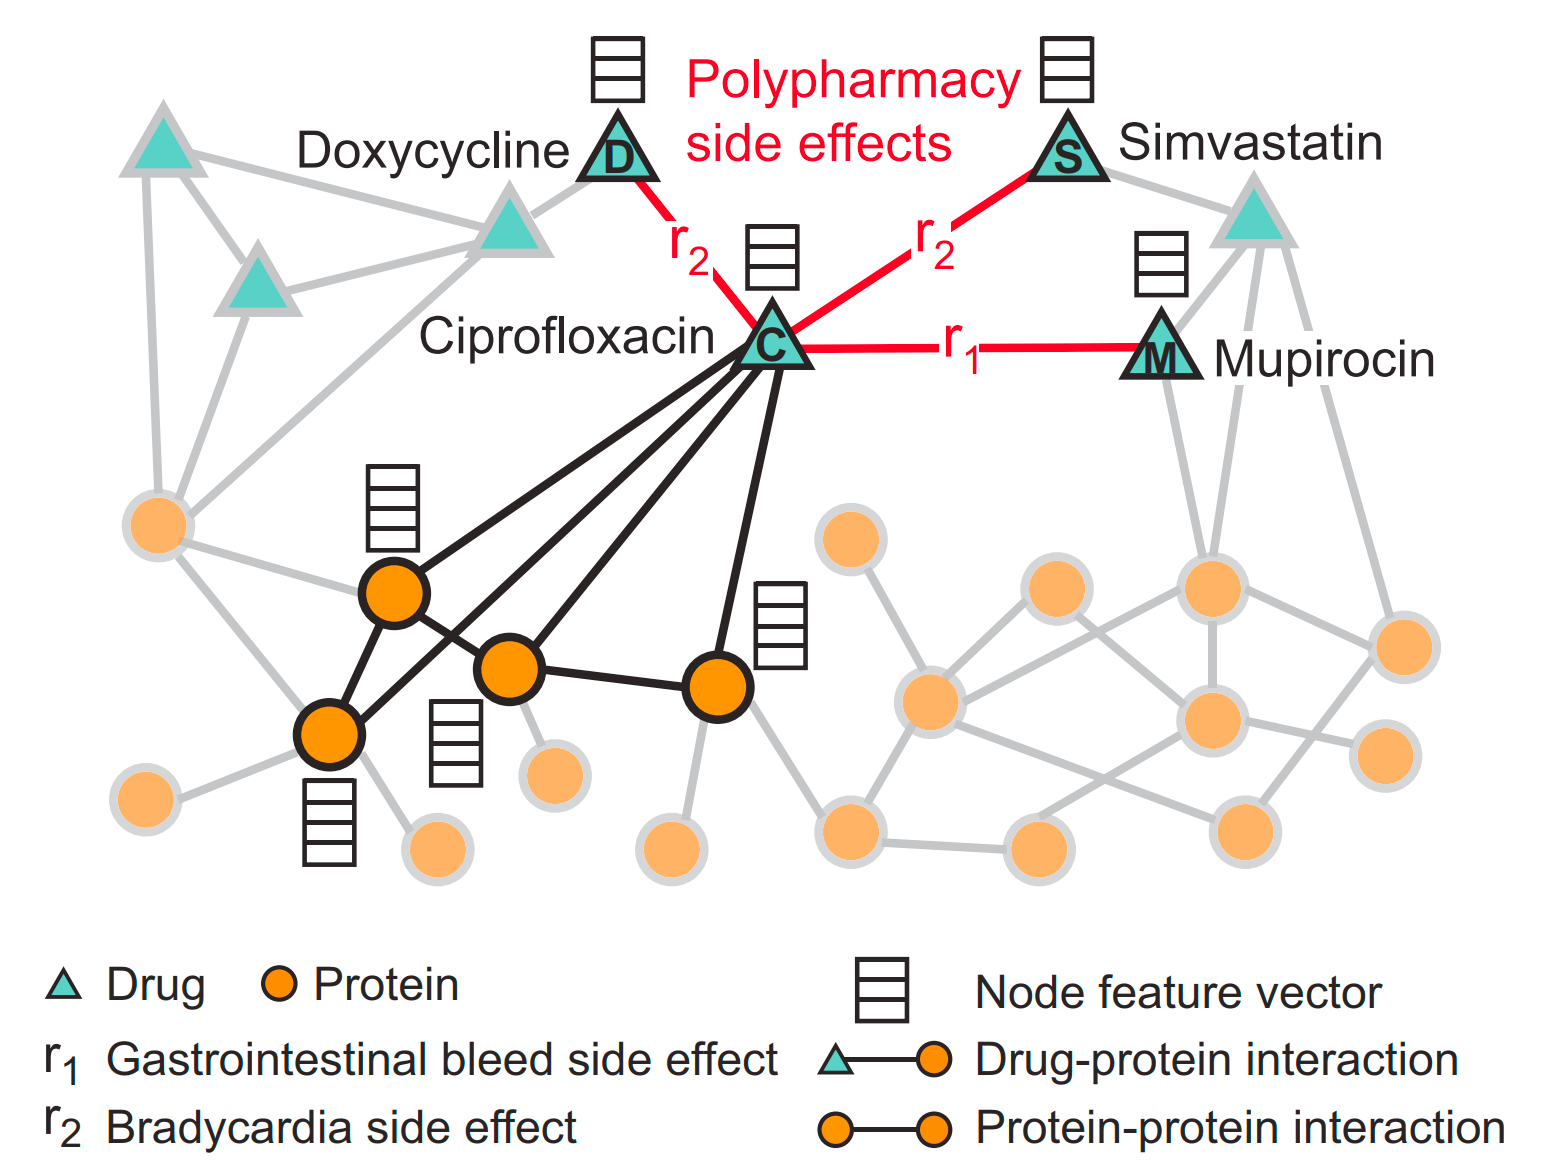 Fig 1. An example graph of polypharmacy side effects 